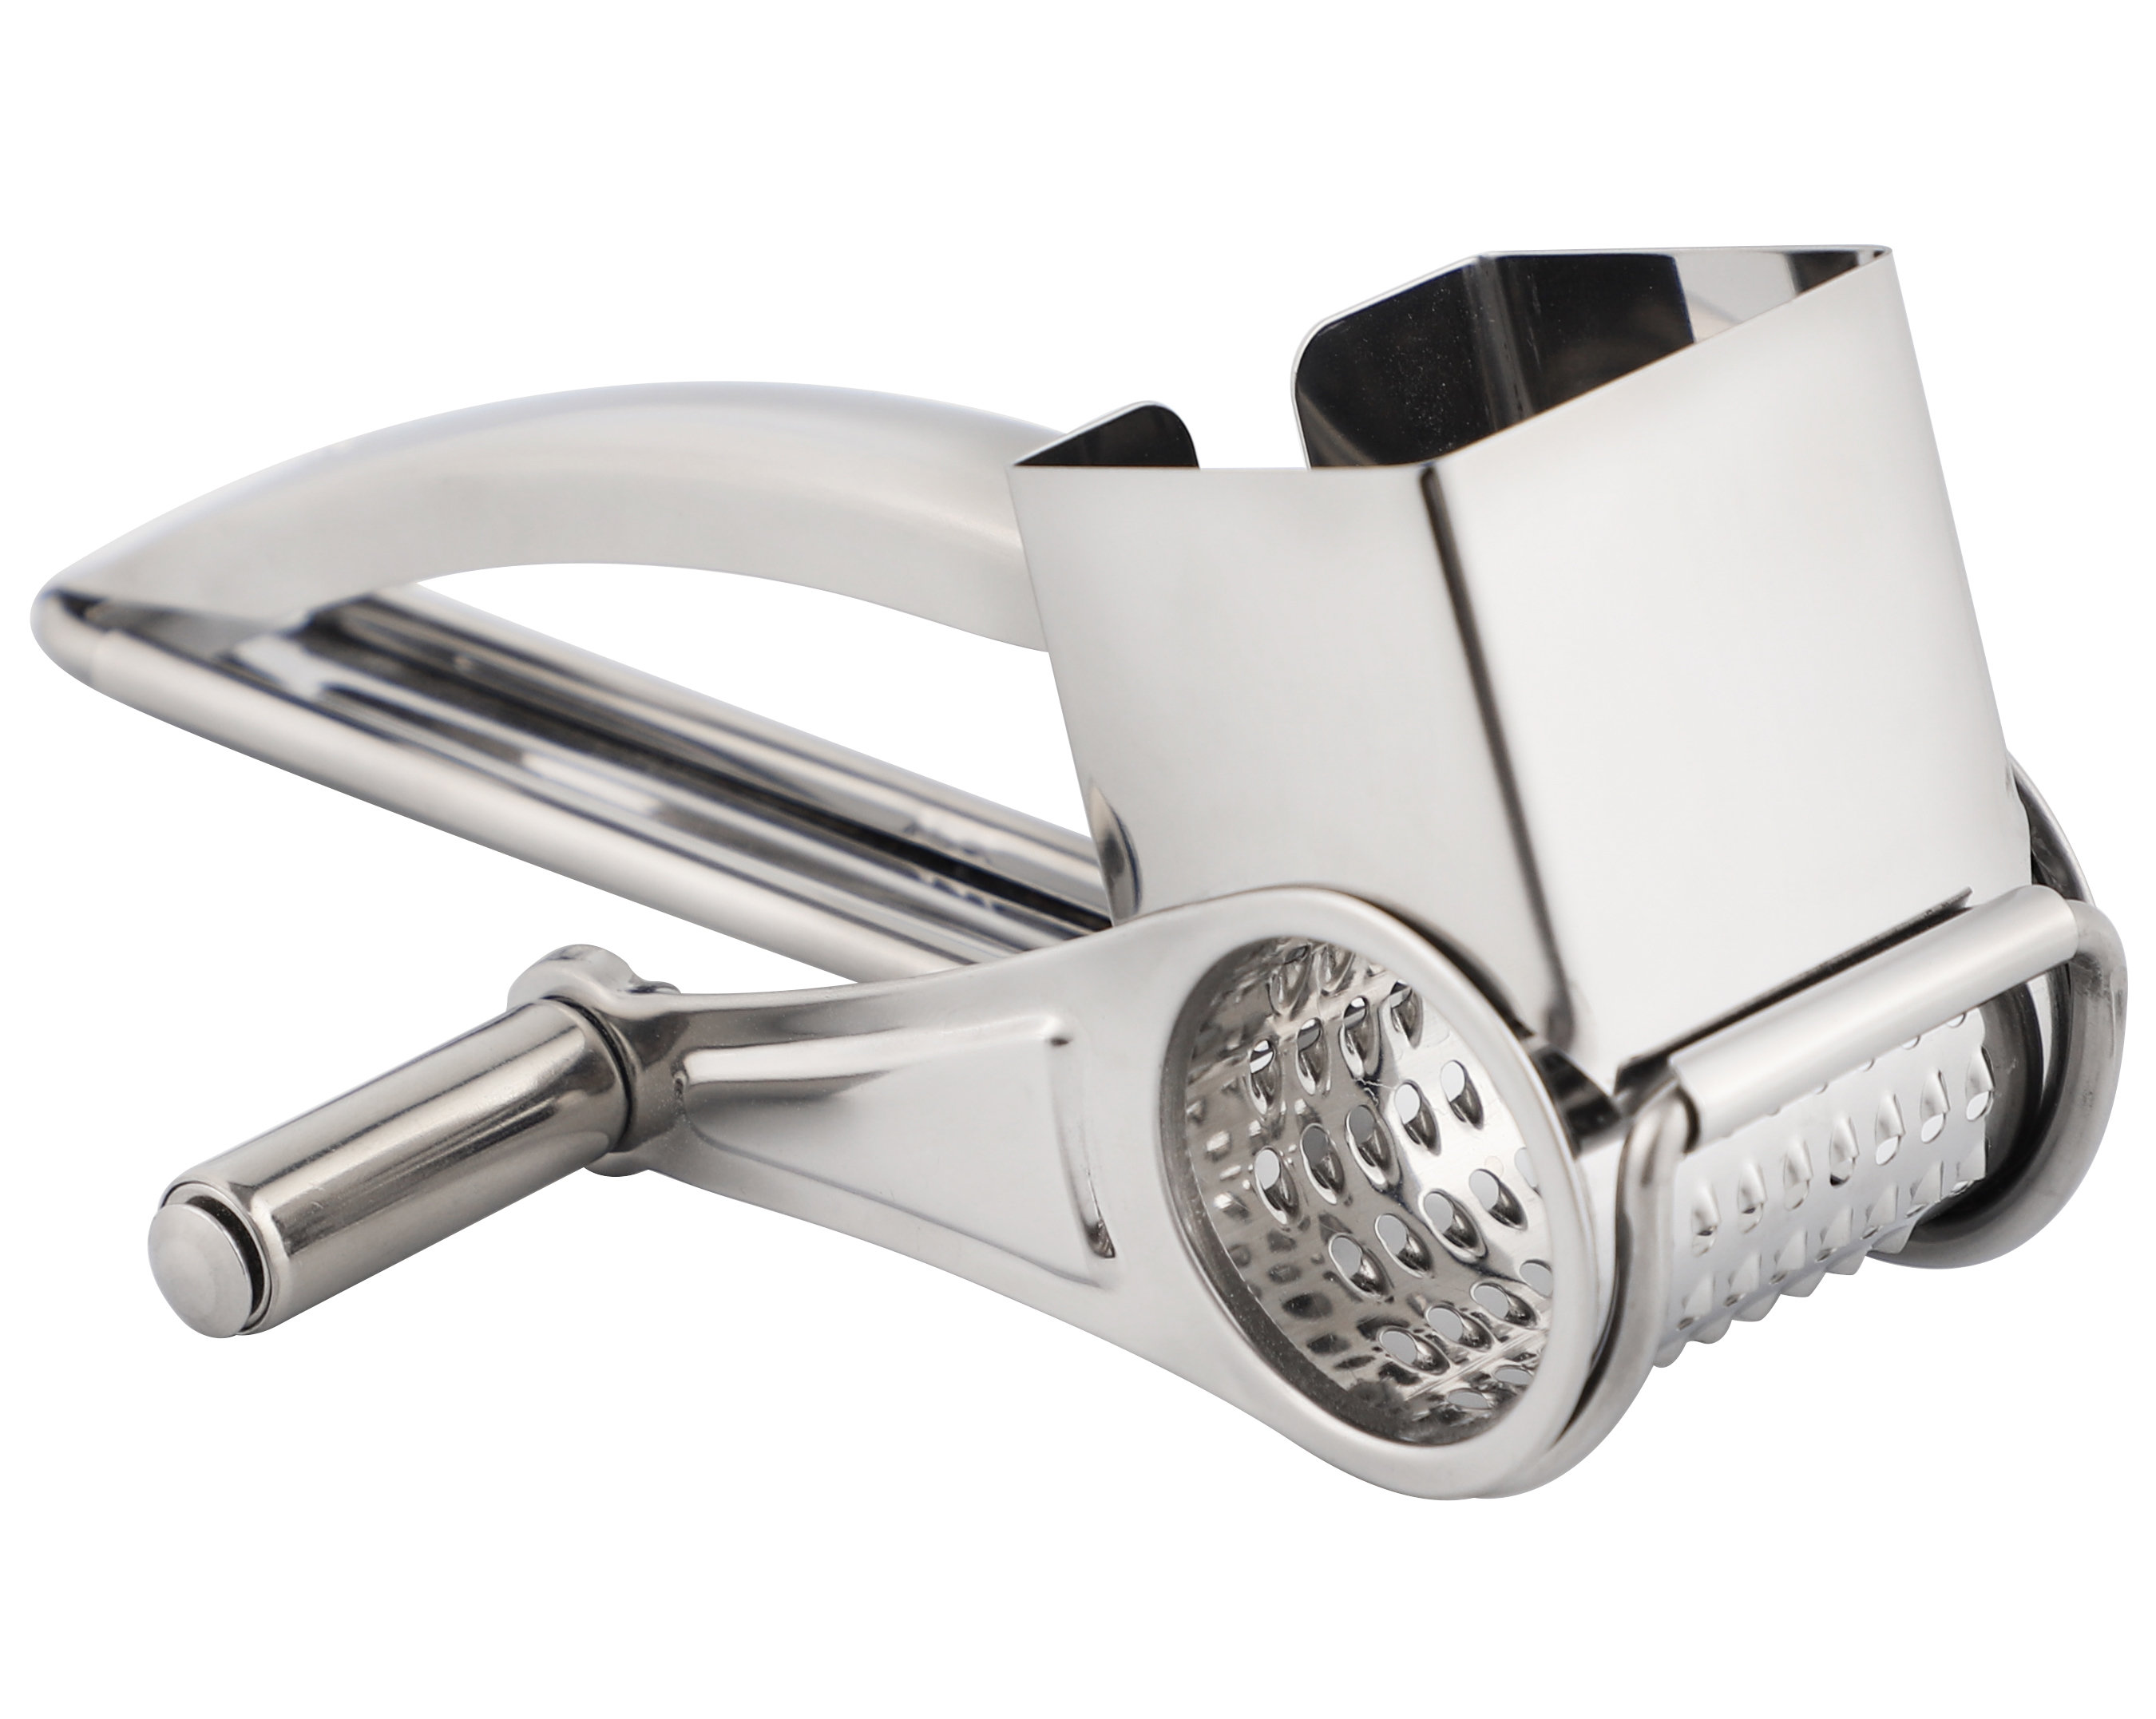  Riess Kelomat Stainless-Steel Crown Grater